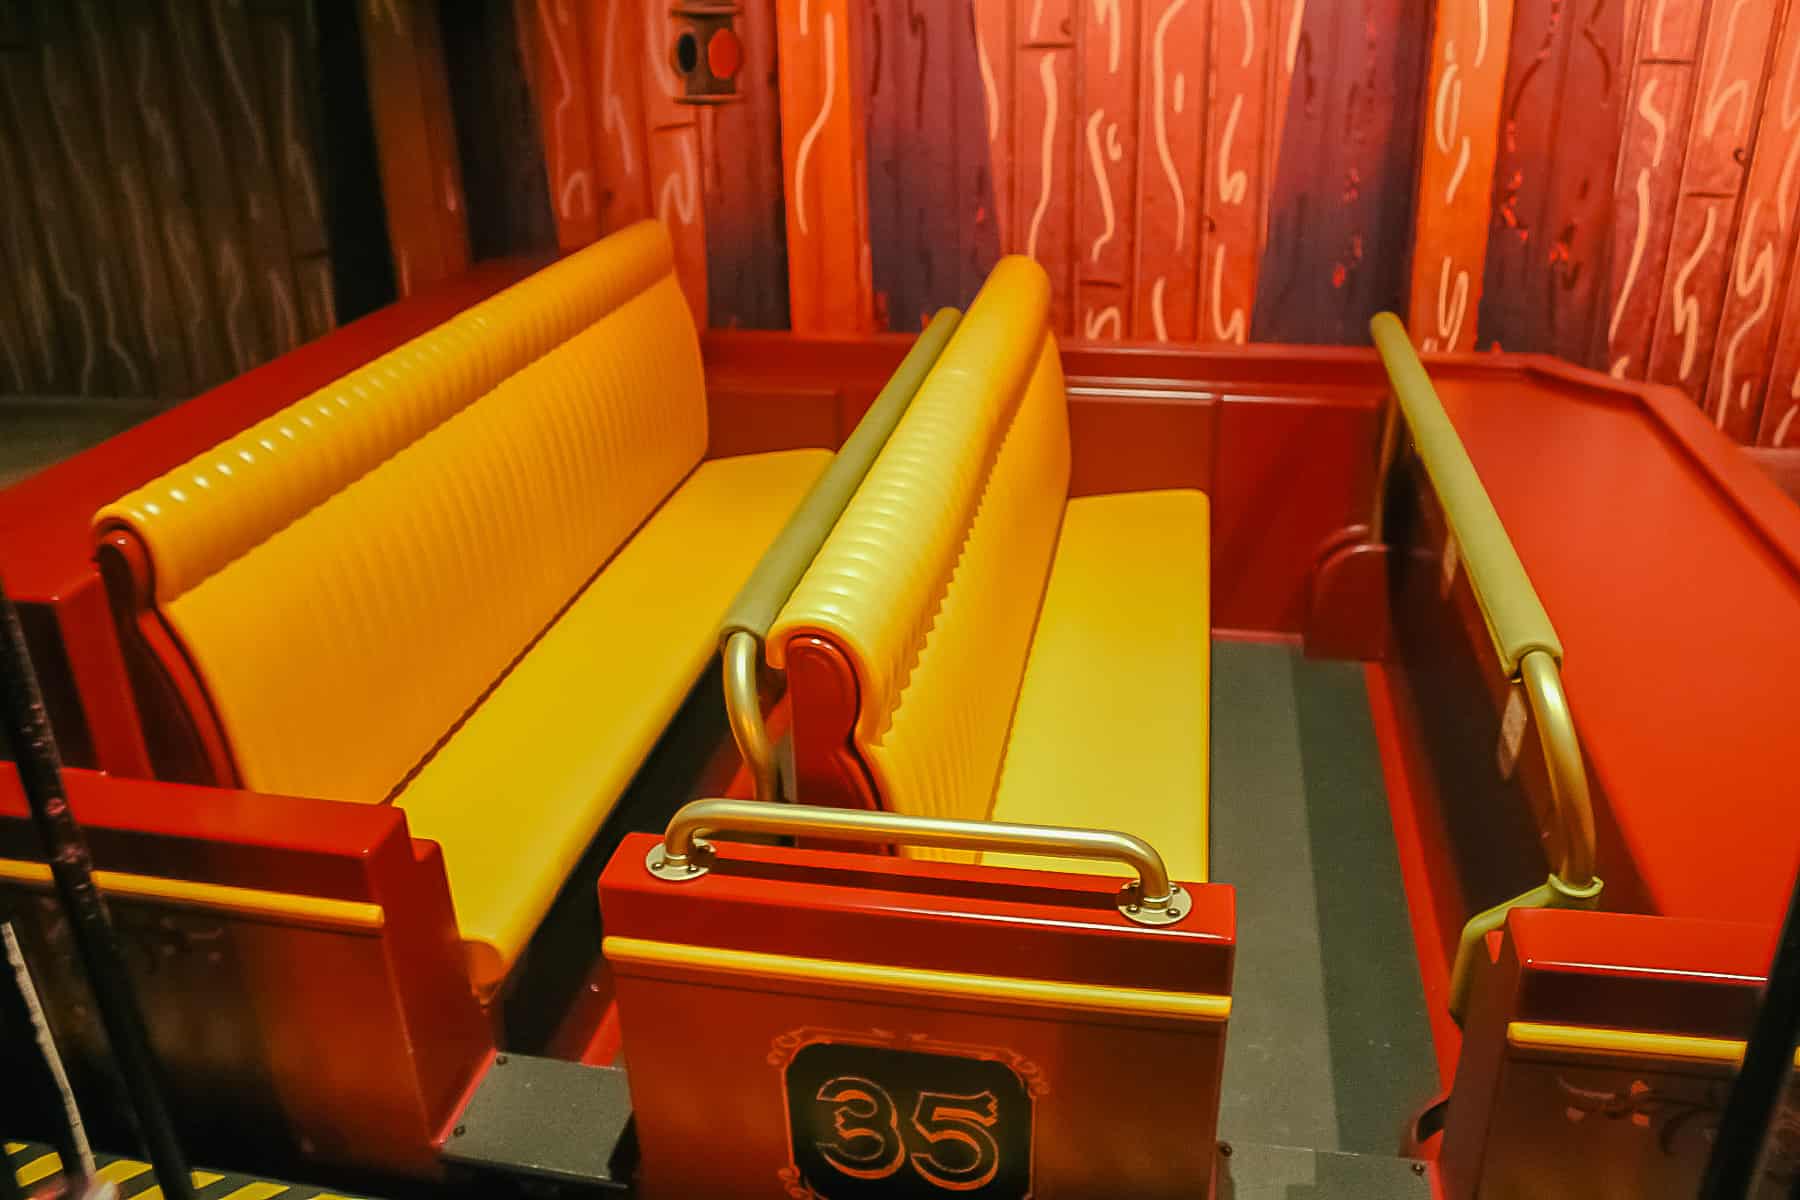 Each ride car has two rows for guests. 